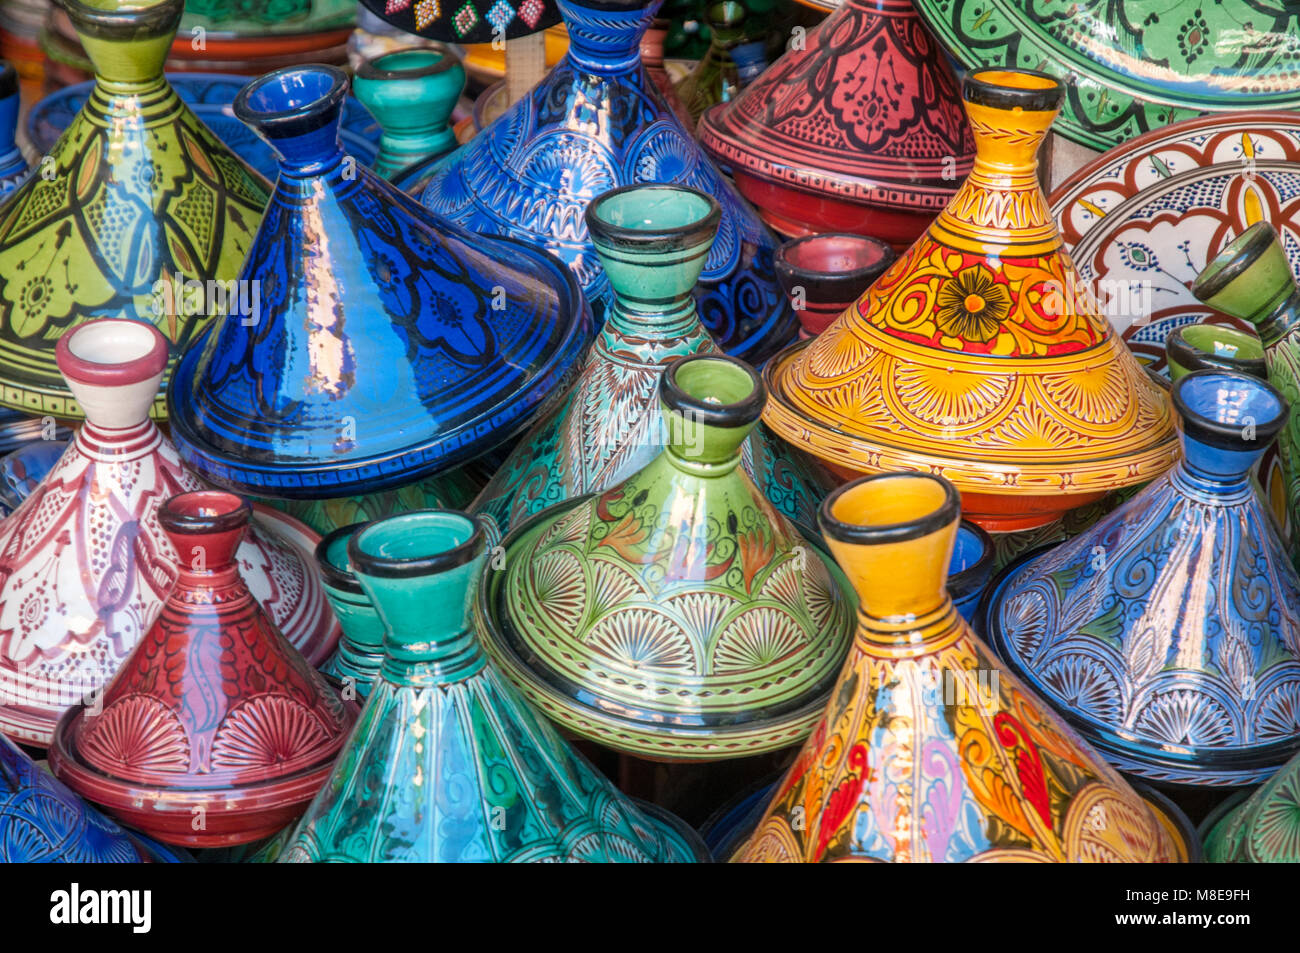 Decorative ceramic tagines on display in a pottery shop in the souks just off the Jemaa el-Fna square in Marrakesh, Morocco. Stock Photo